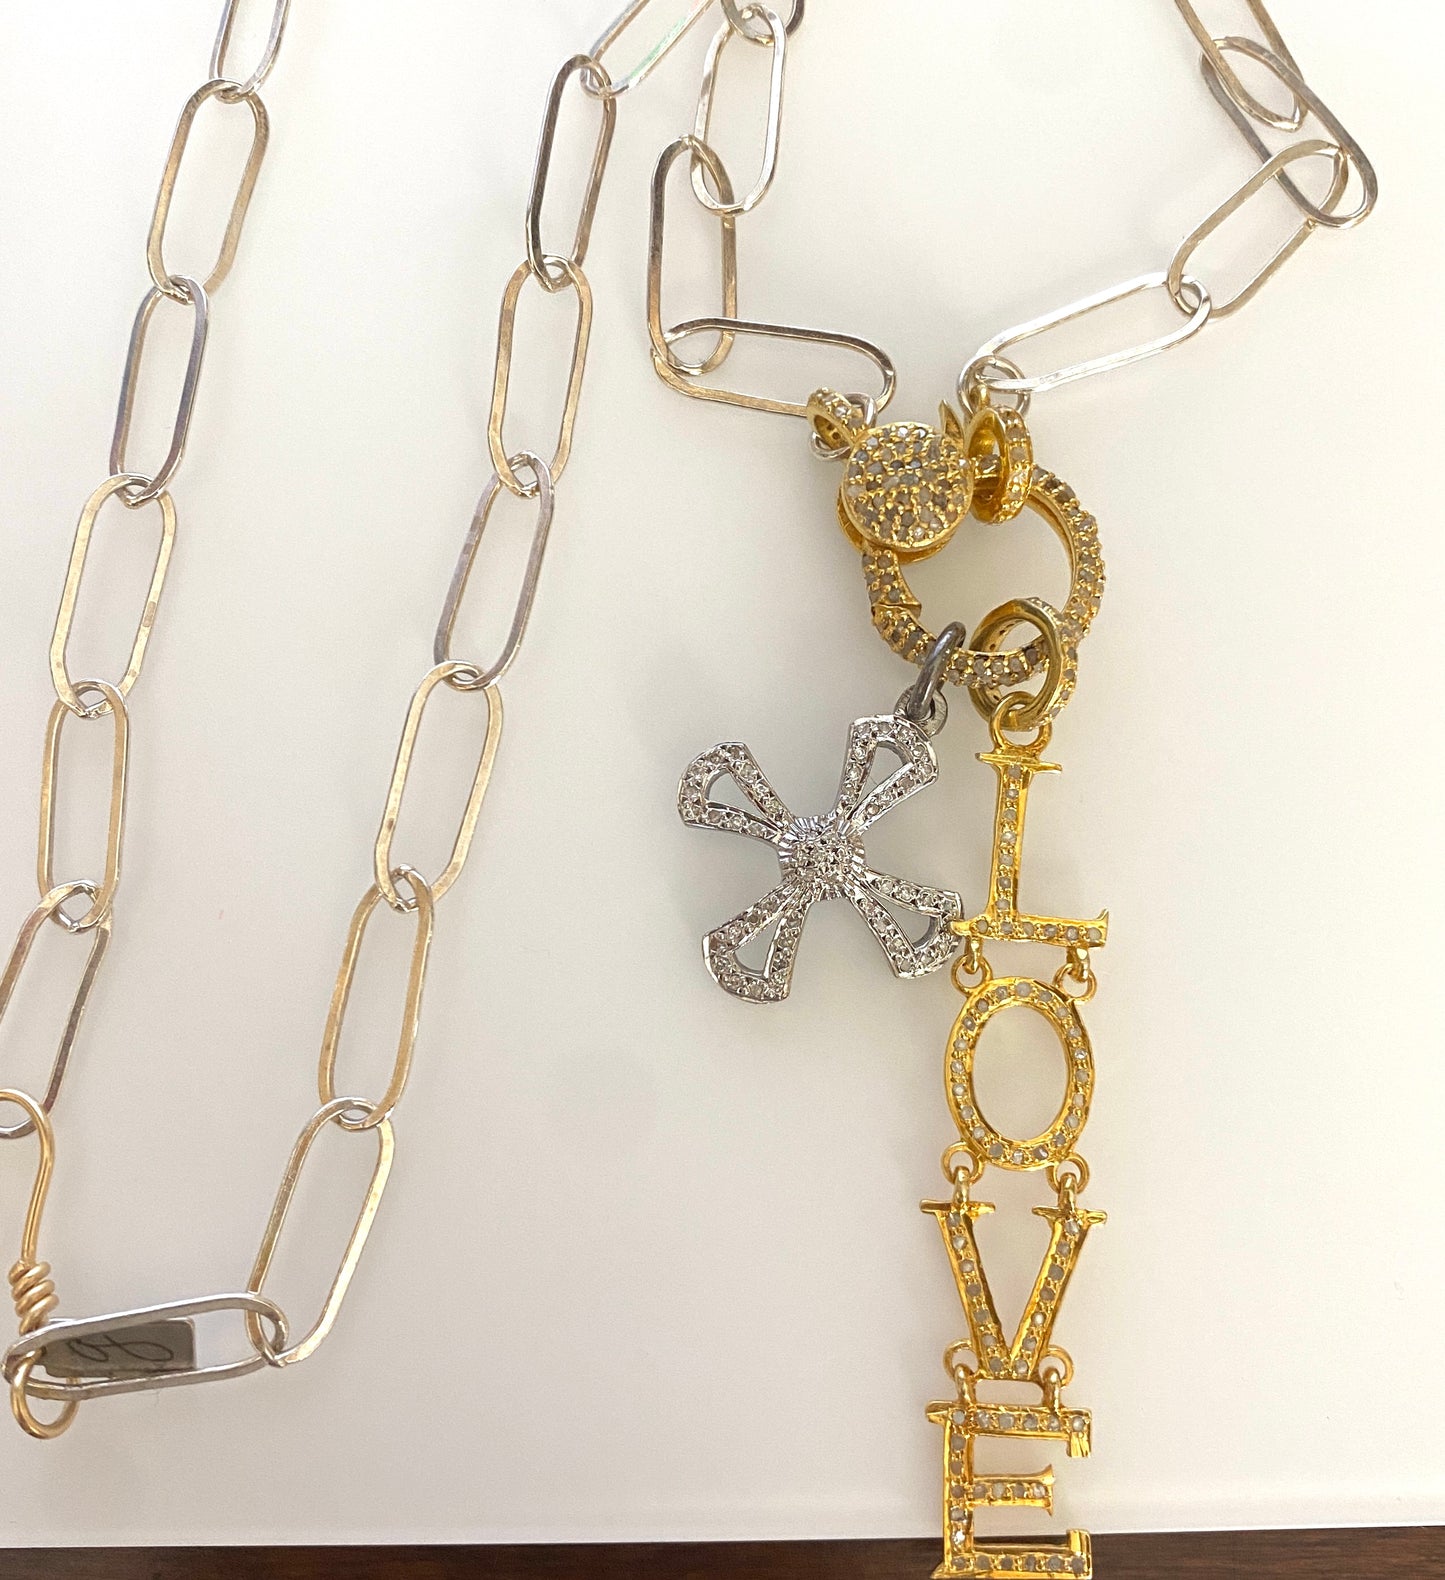 Sterling Silver Paperclip Chain Necklace With Gold Diamond Lobster Clasp With Diamond "LOVE" and Cross Pendants